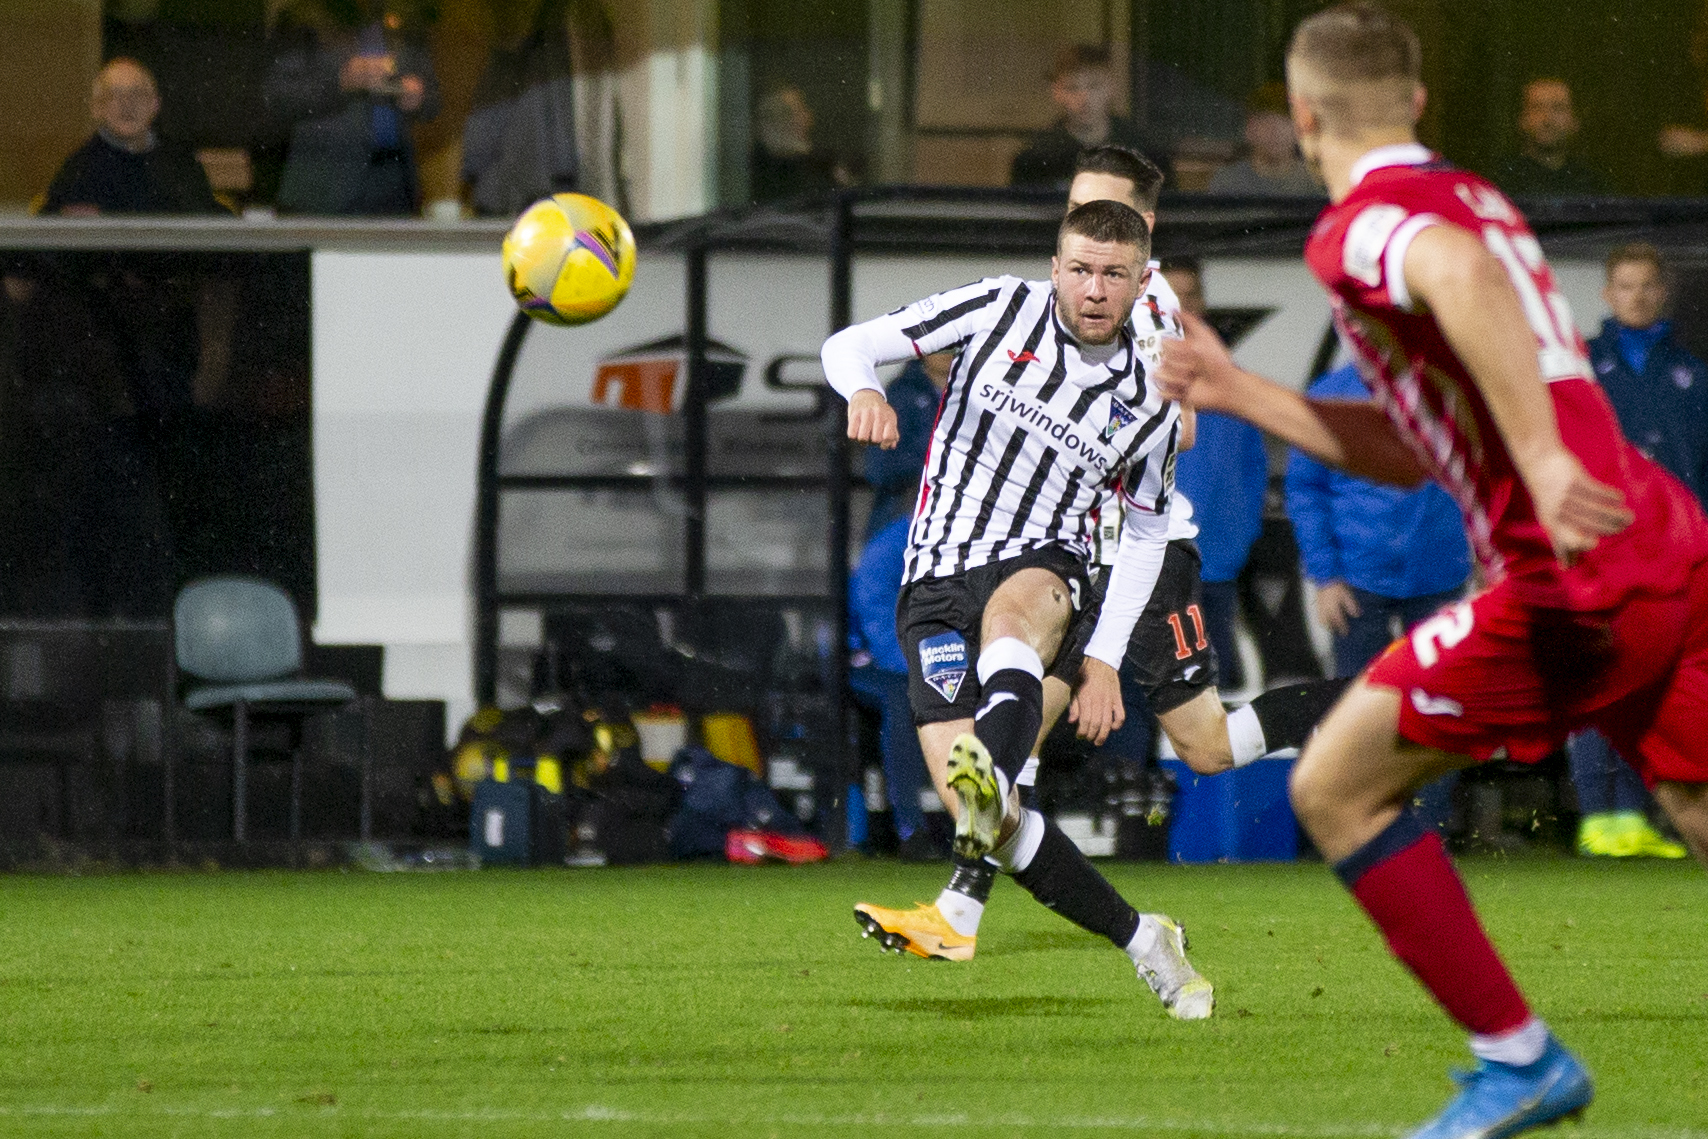 Dunfermline: Dom Thomas on team form and return to side